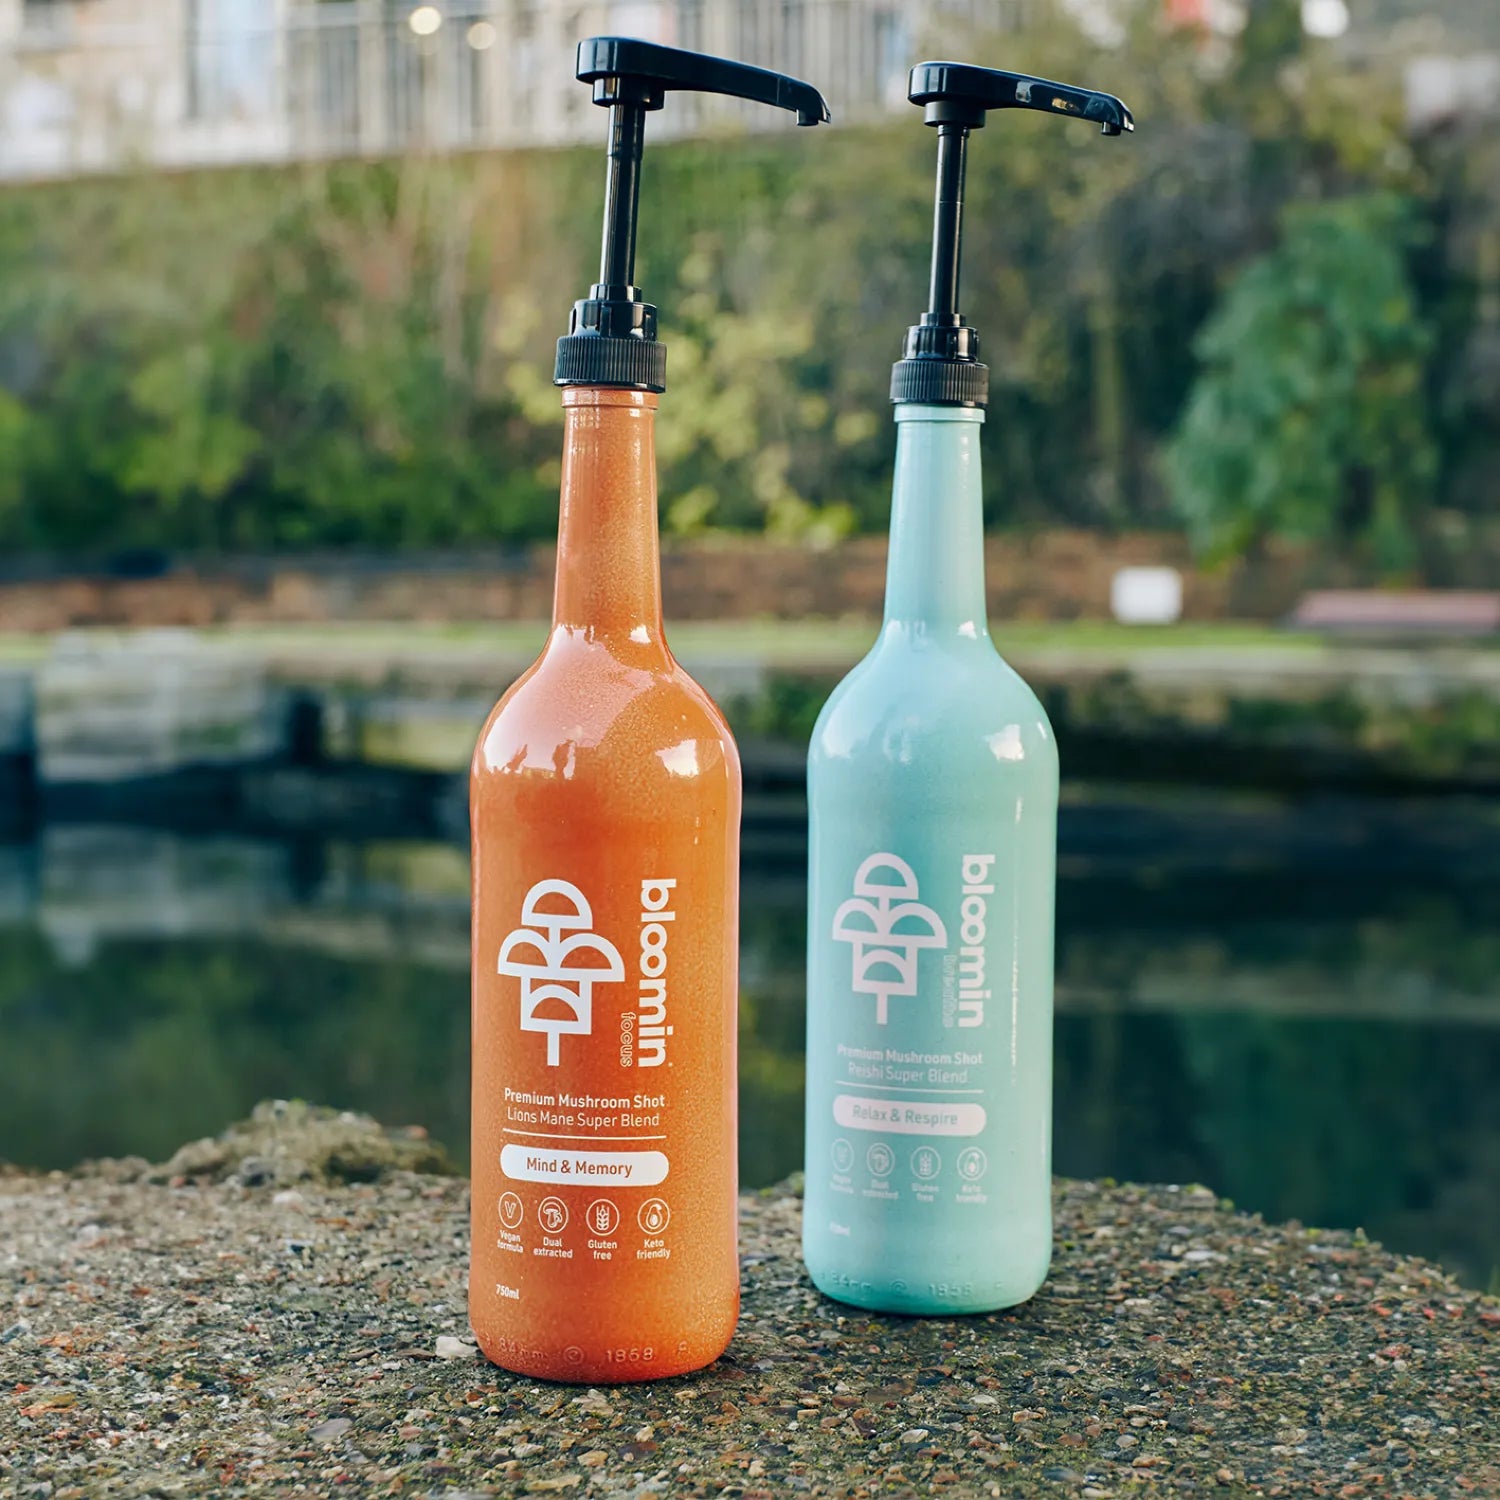 Bloomin Focus and breathe pumpshot bottles outdoors